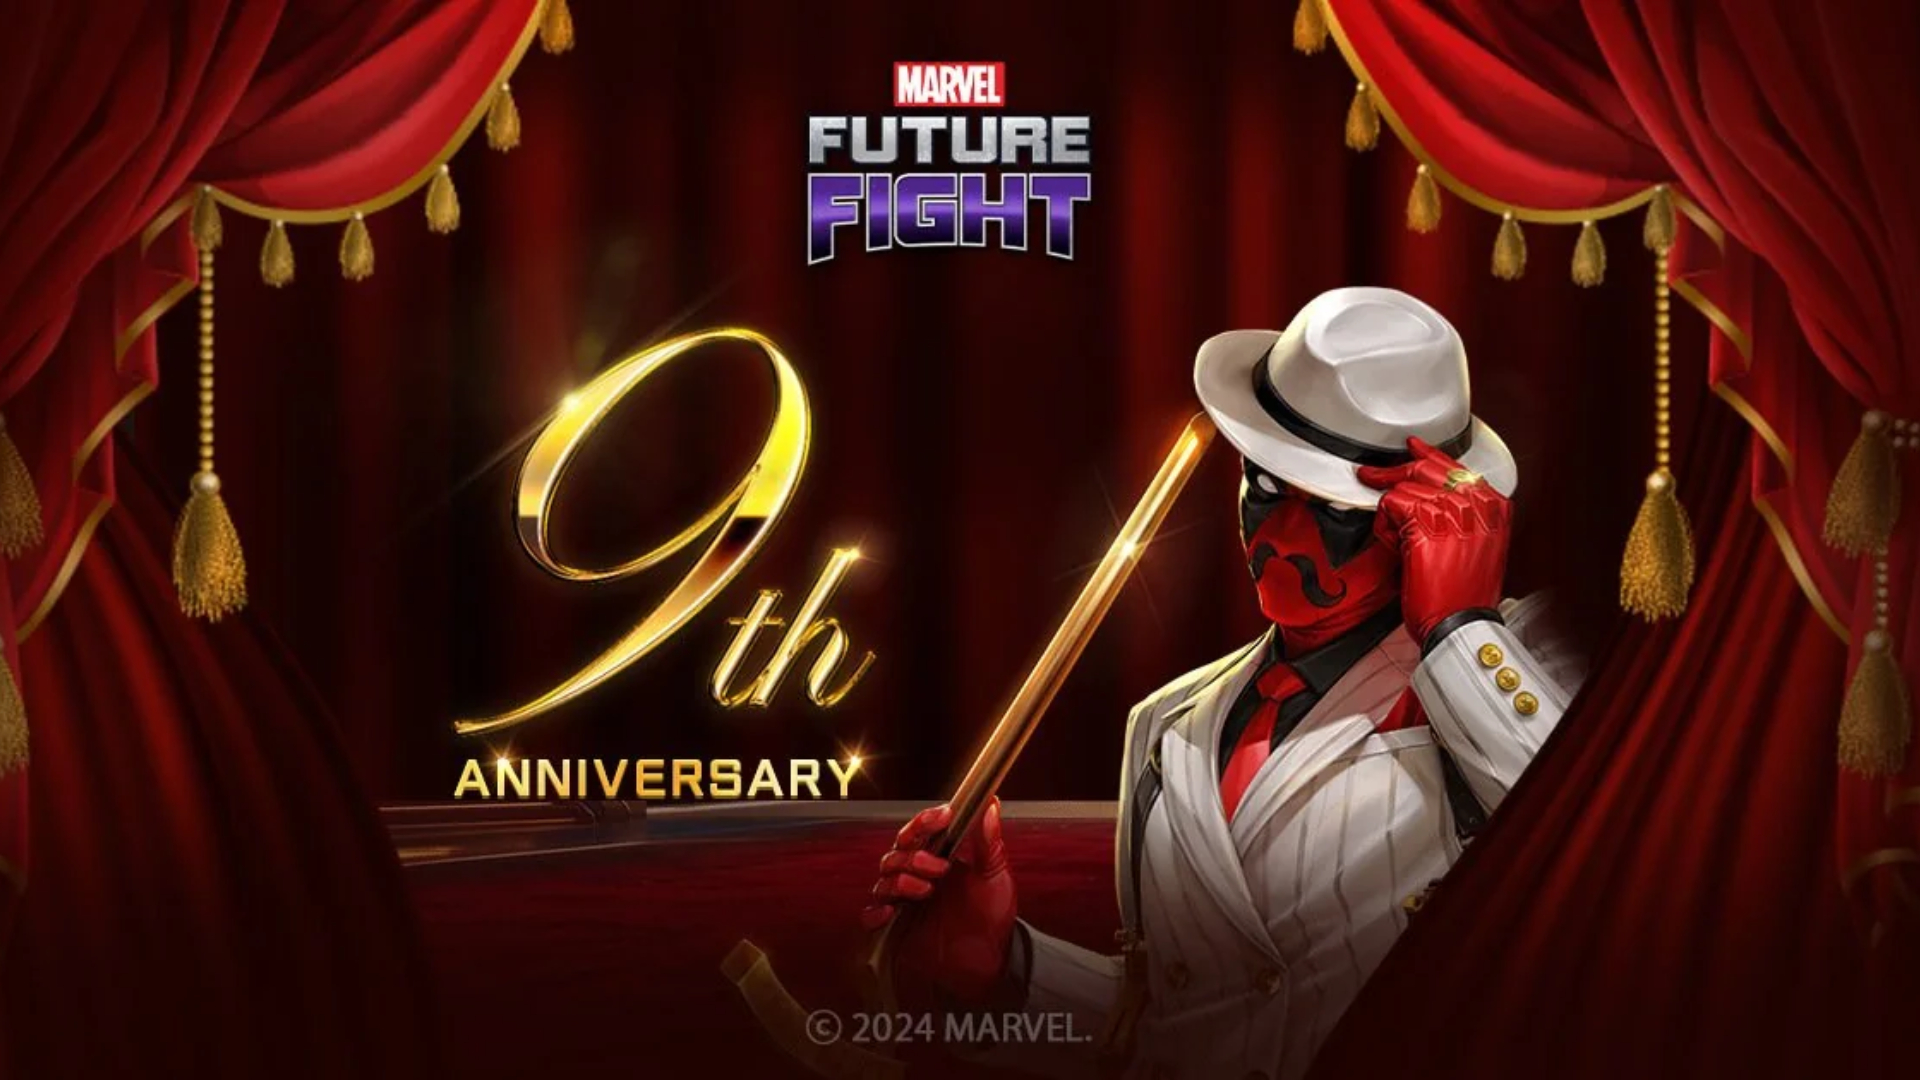 Marvel Future Fight 9th Anniversary: Special Events, Rewards and More image